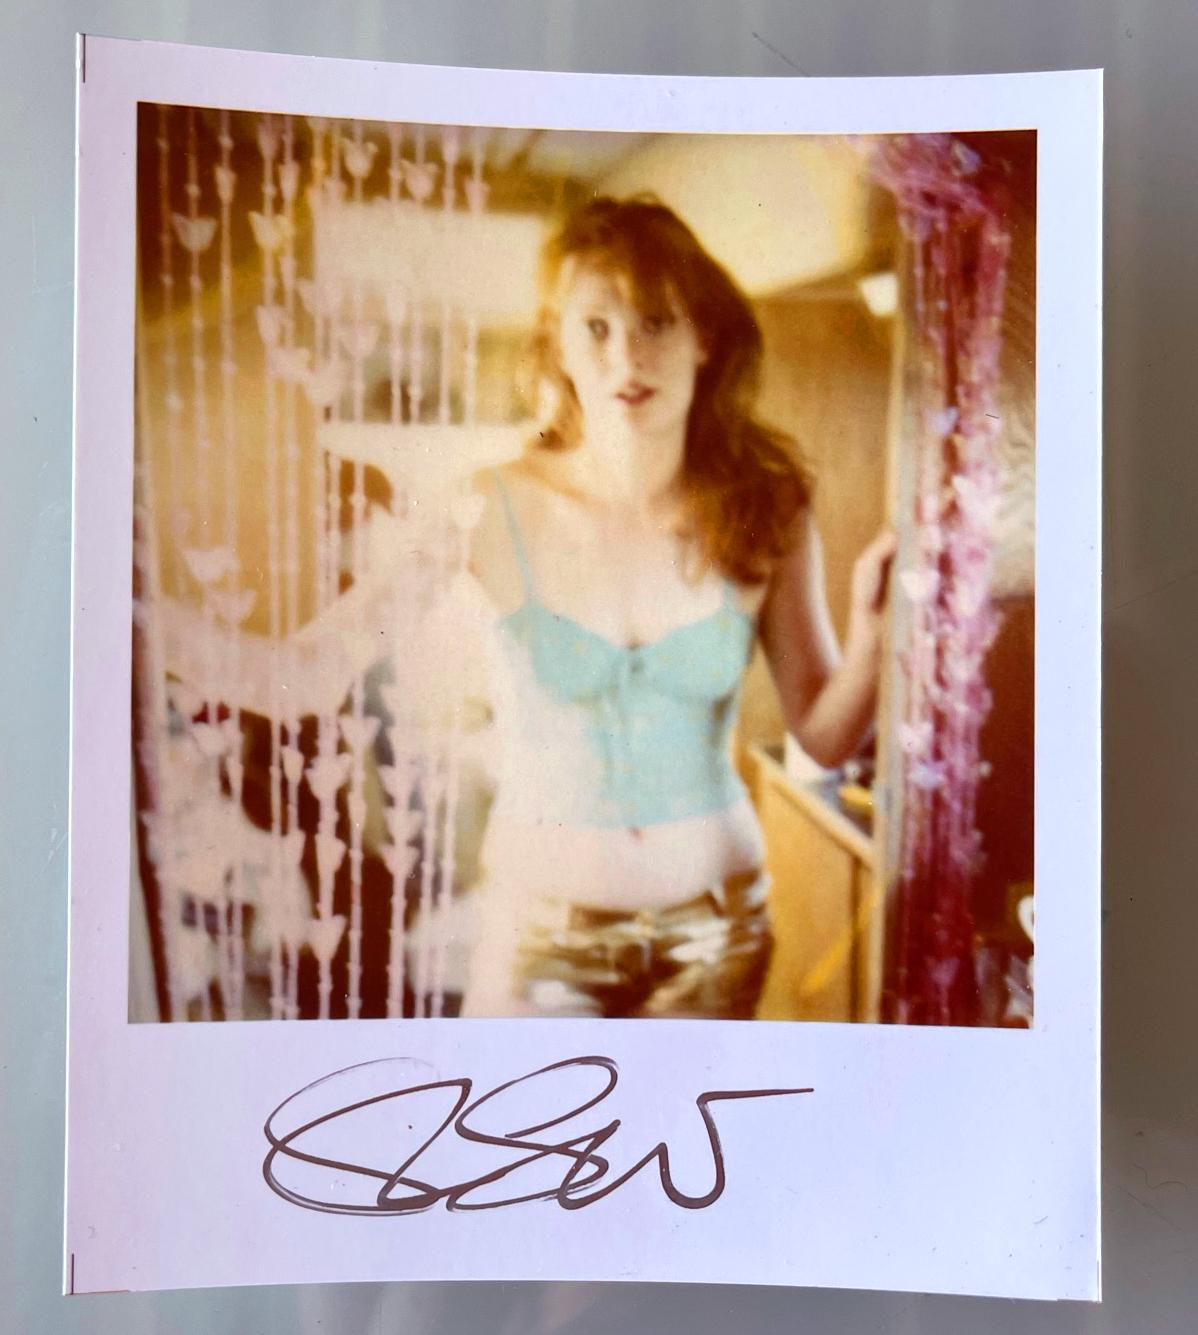 Stefanie Schneider's Mini
Daisy in Trailer (Till Death do us Part)

signed in front, not mounted. 
Digital Color Photographs based on a Polaroid. 

Polaroid sized open Editions 1999-2013
10.7 x 8.8cm (Image 7.9x7.7cm)

Included is the Vinyl